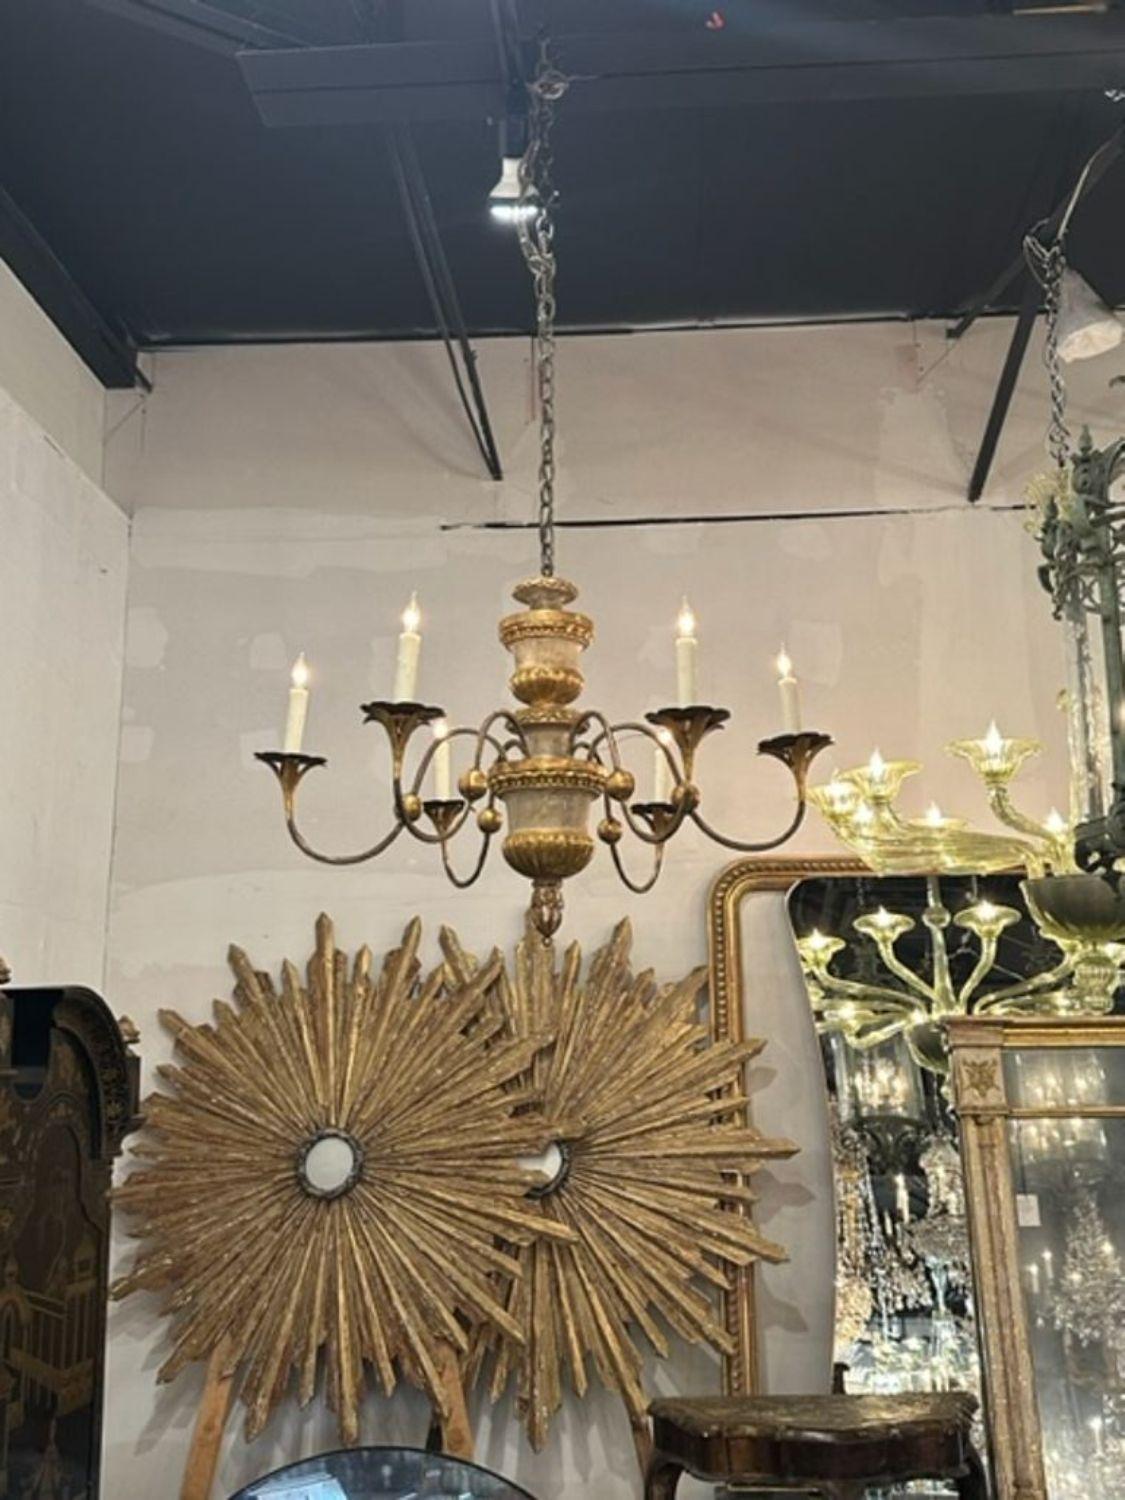 Very nice 19th century Italian carved and parcel gilt 6 light chandelier.  Lovely patina and carvings on the piece! Very pretty!